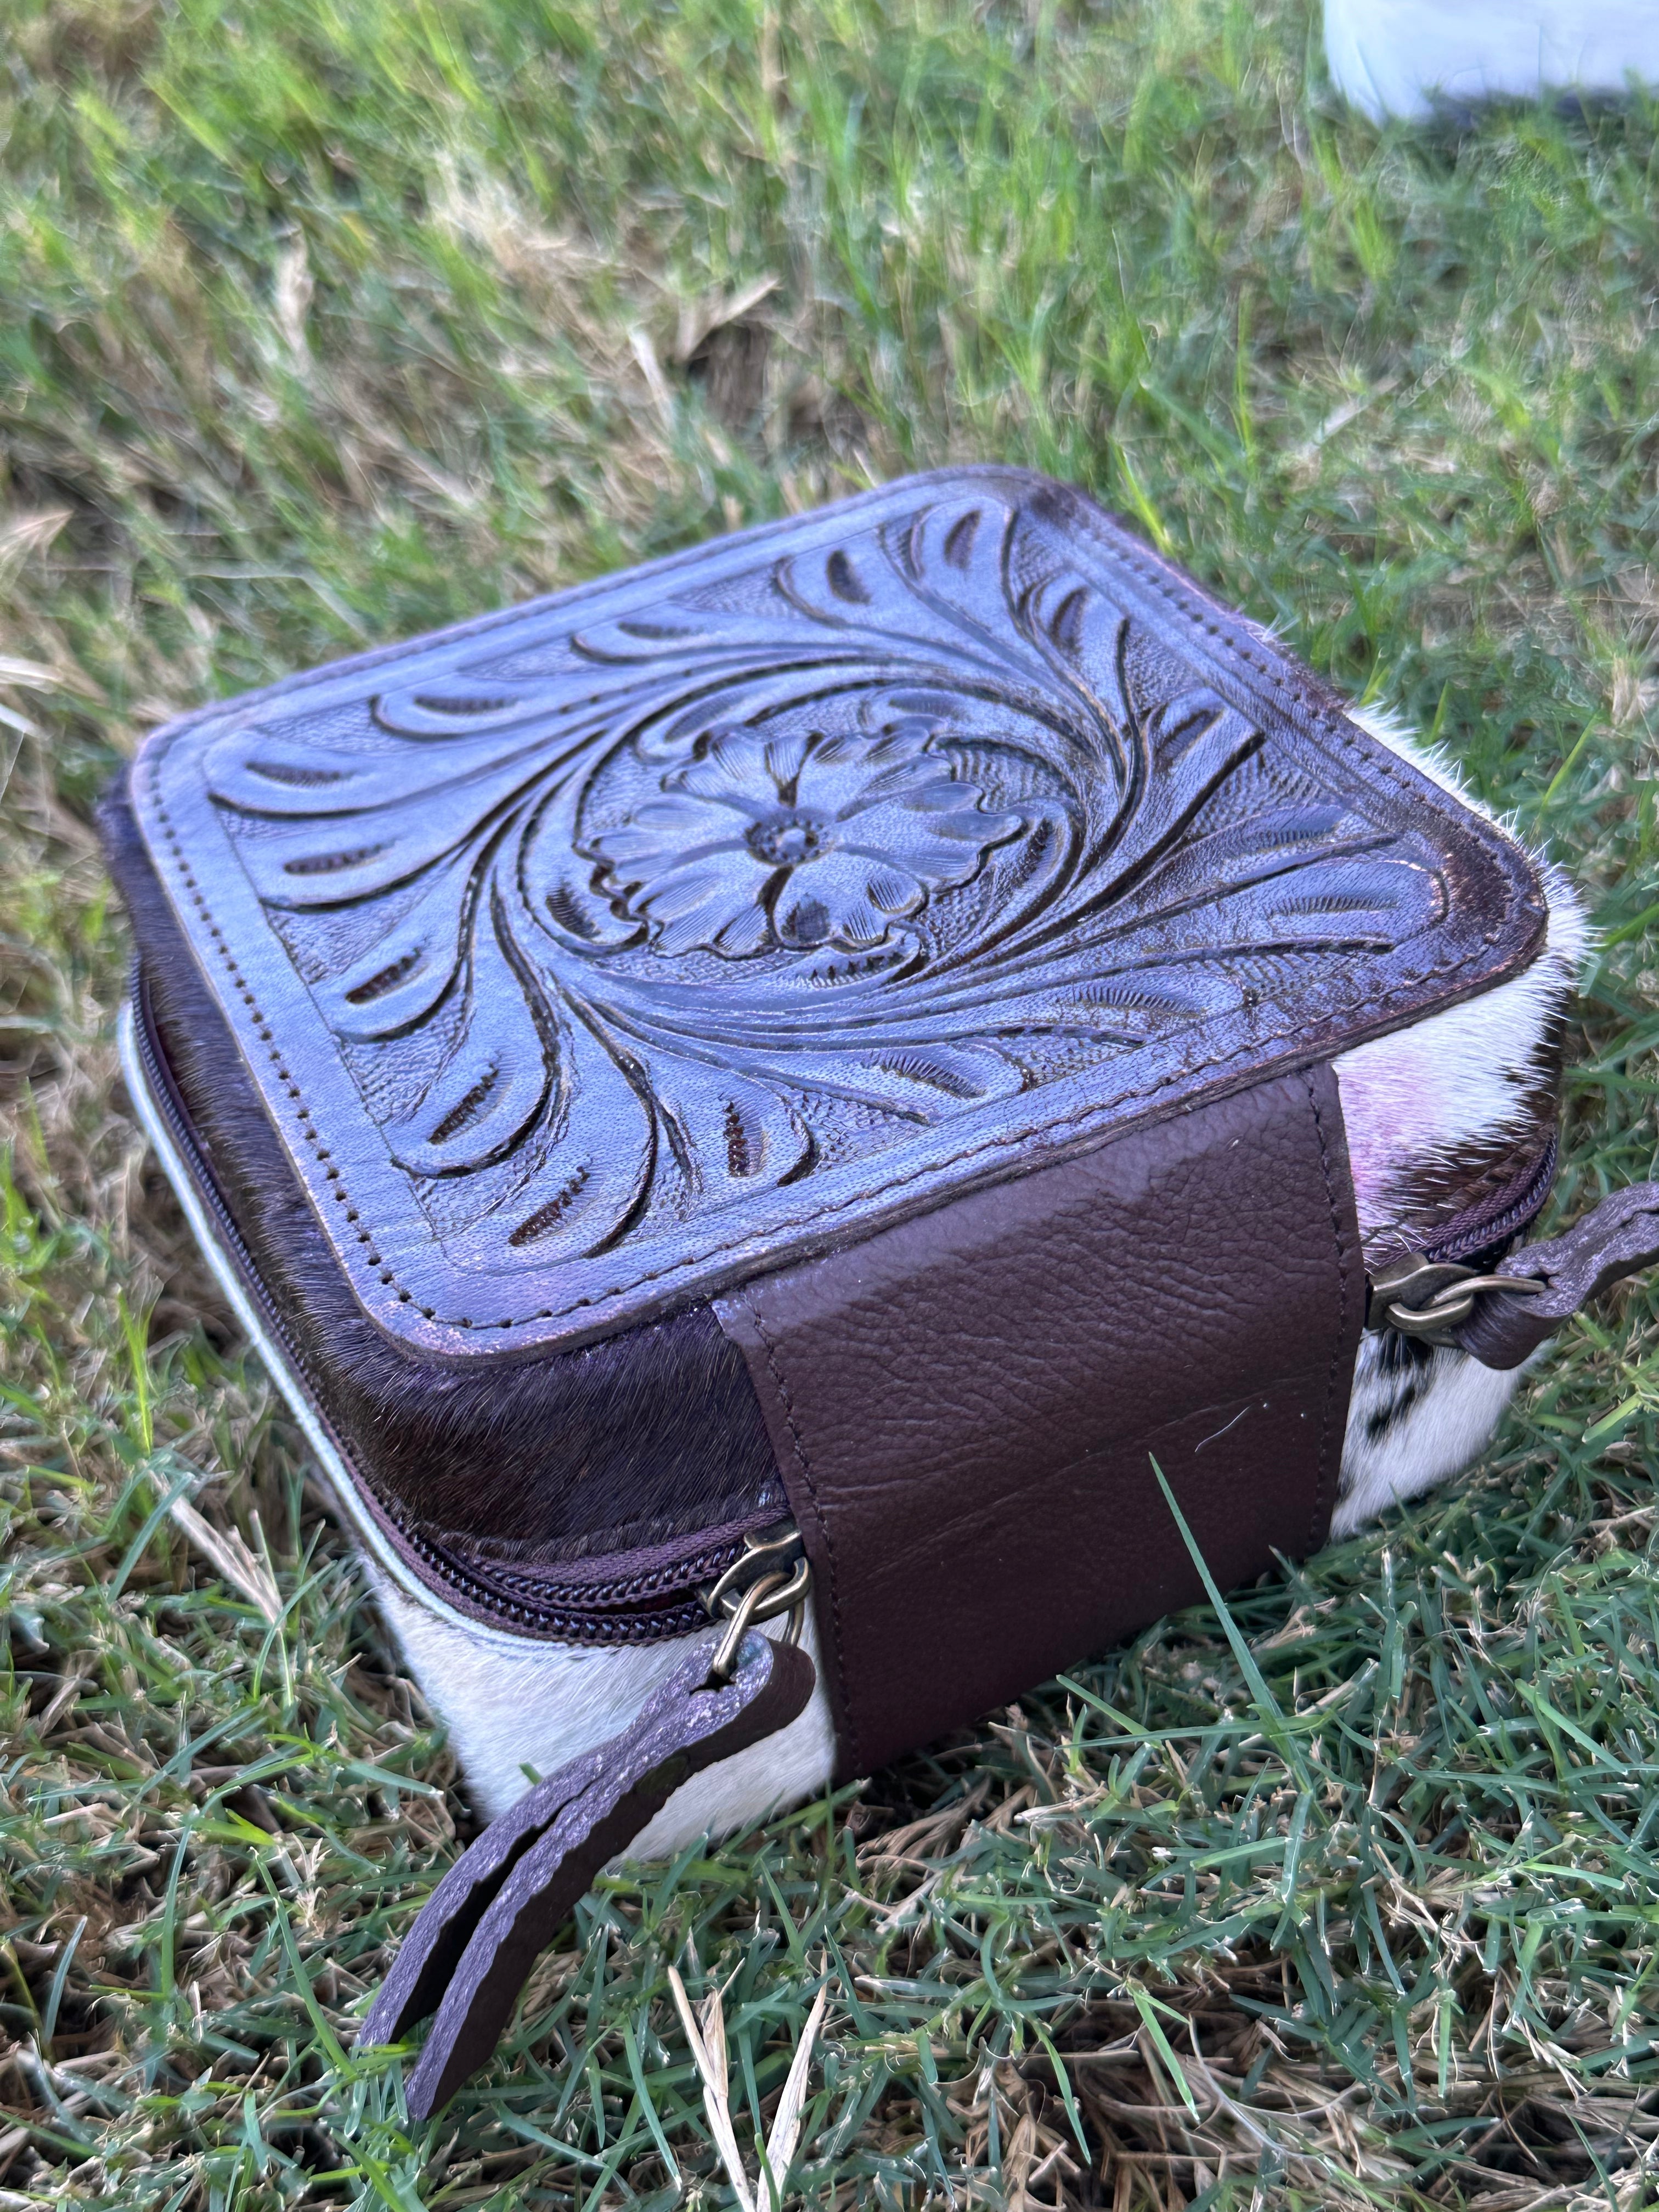 Genuine Tooled Leather Cowhide Jewelry Box